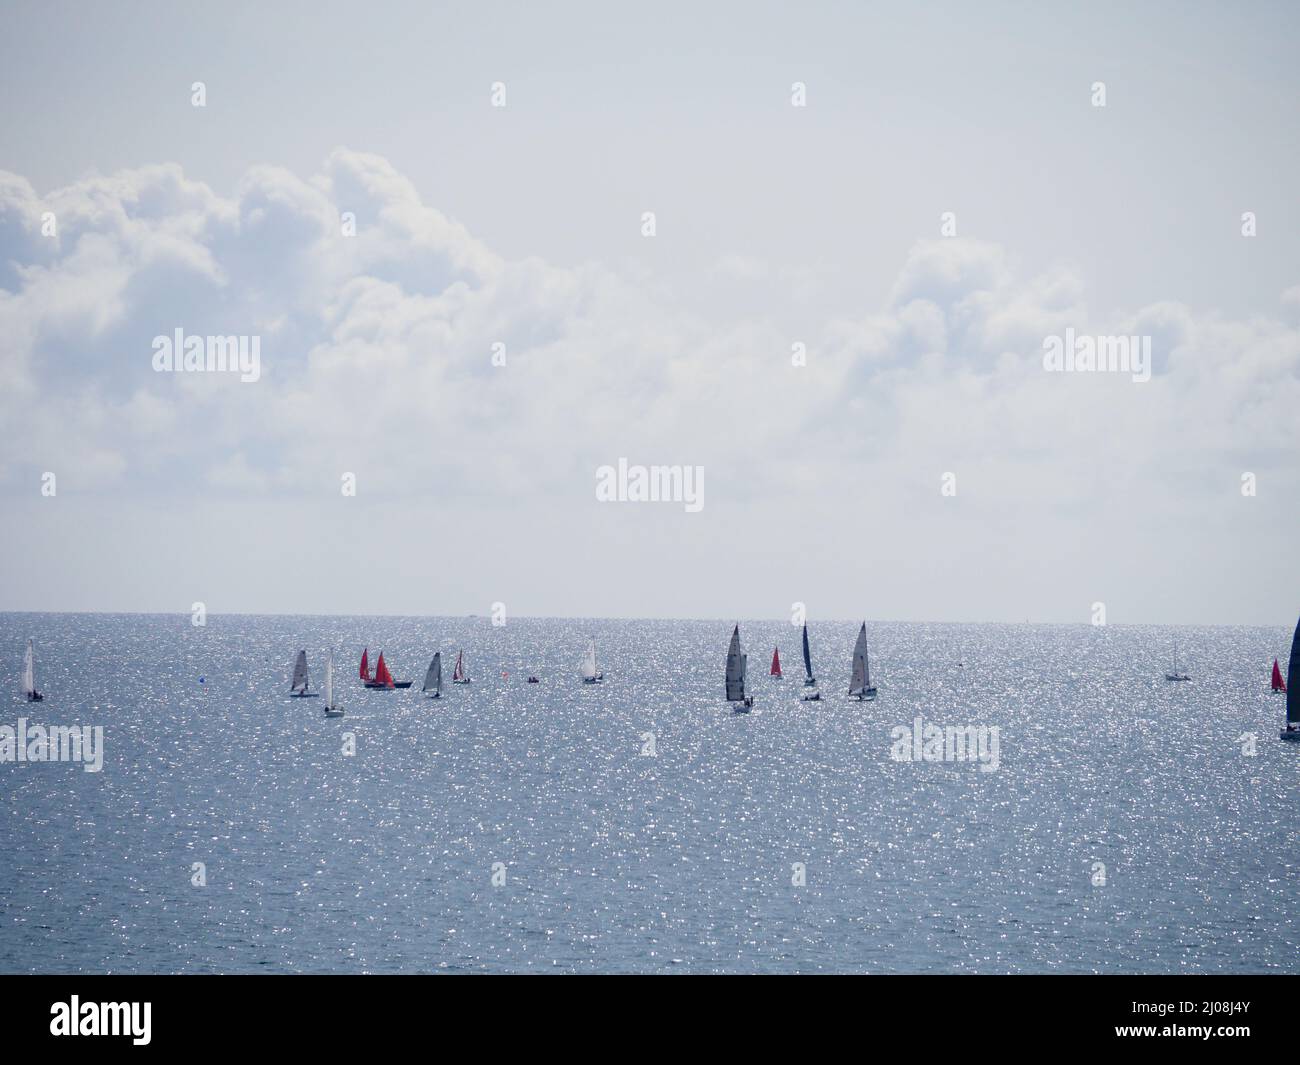 Some small yachts with colourful sails racing in the sea during the summer Stock Photo